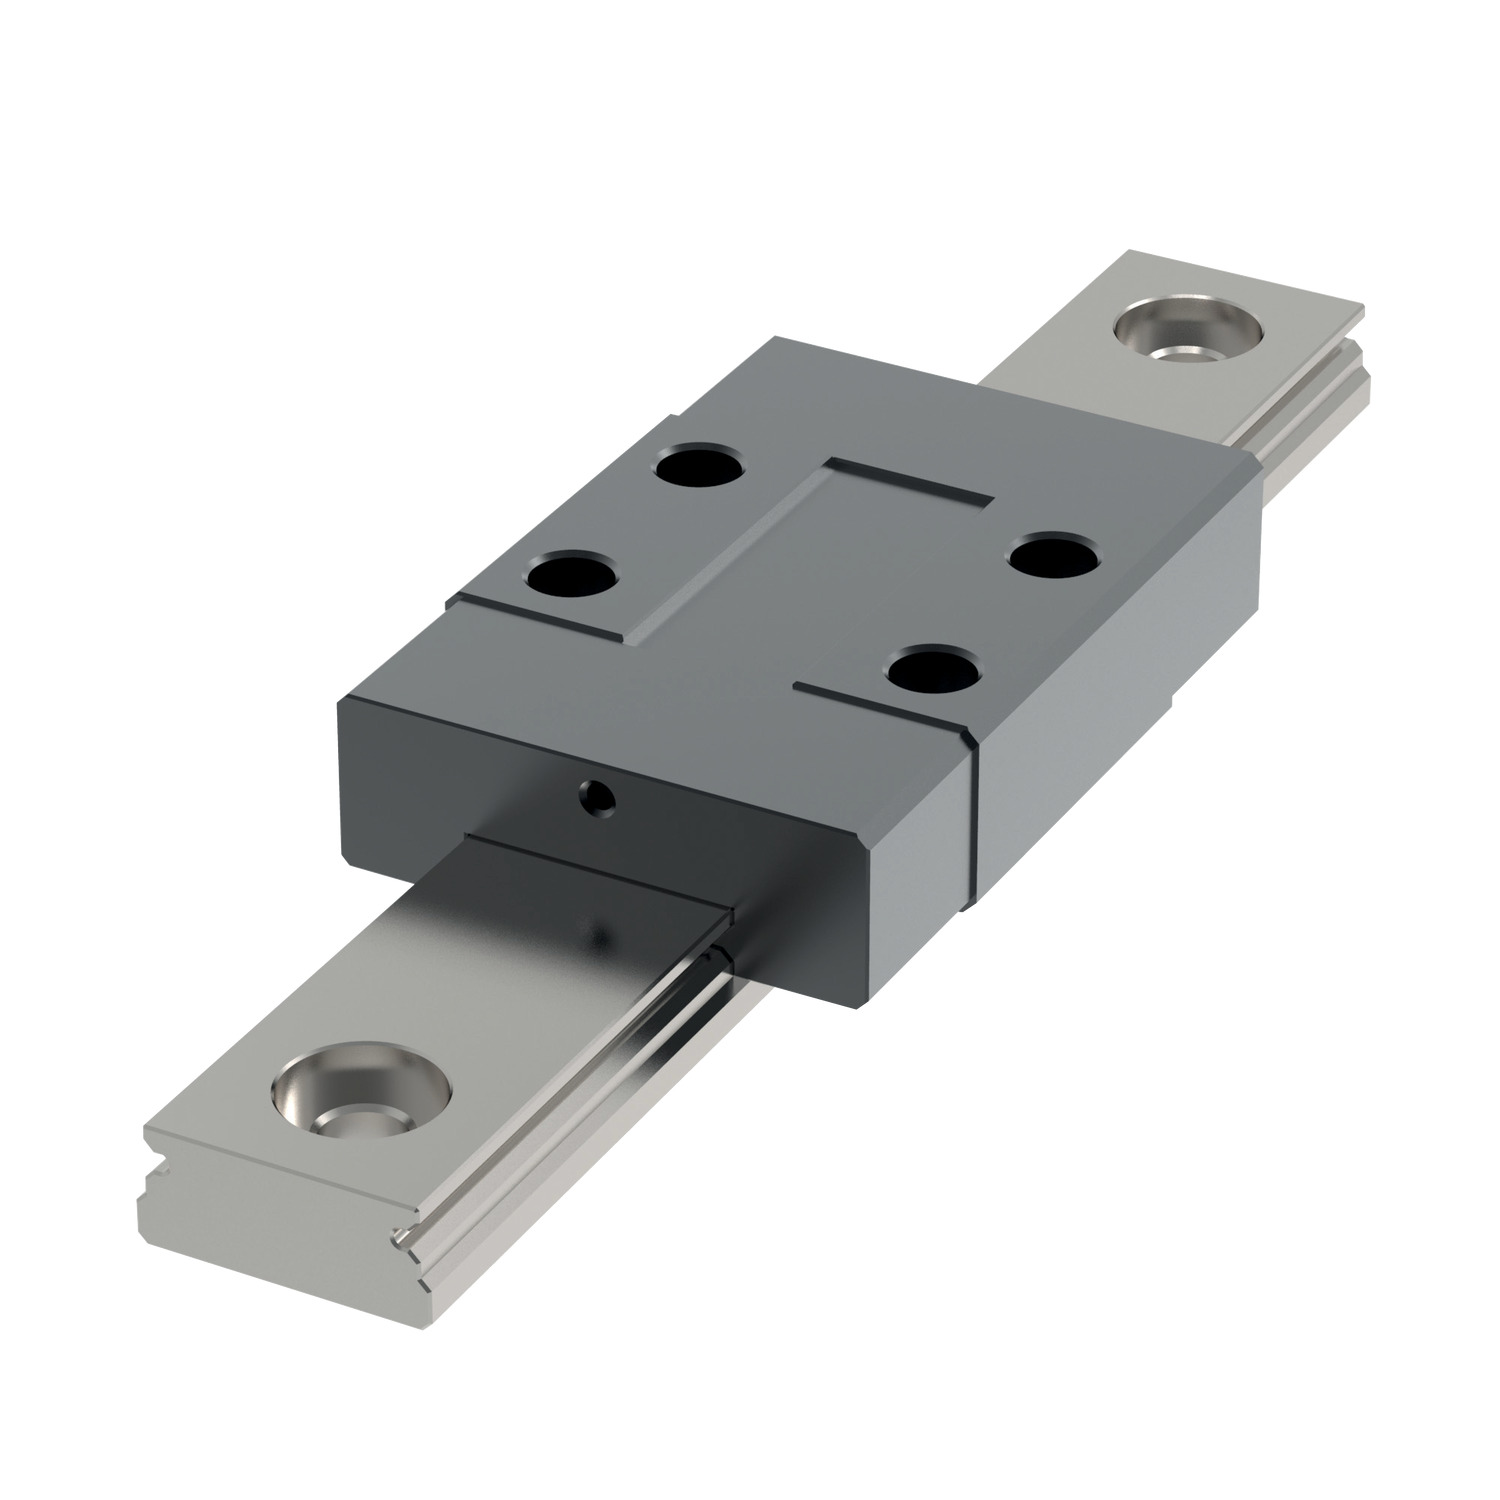 Miniature Linear Guideways We also stock a wide range of hardened stainless steel Linear Guides for applications in which space may be at a premium. Available in width sizes 5, 7, 9, 12, 15mm. Carriages (L1010.C) and clamps (L1010.CL) are also in stock.